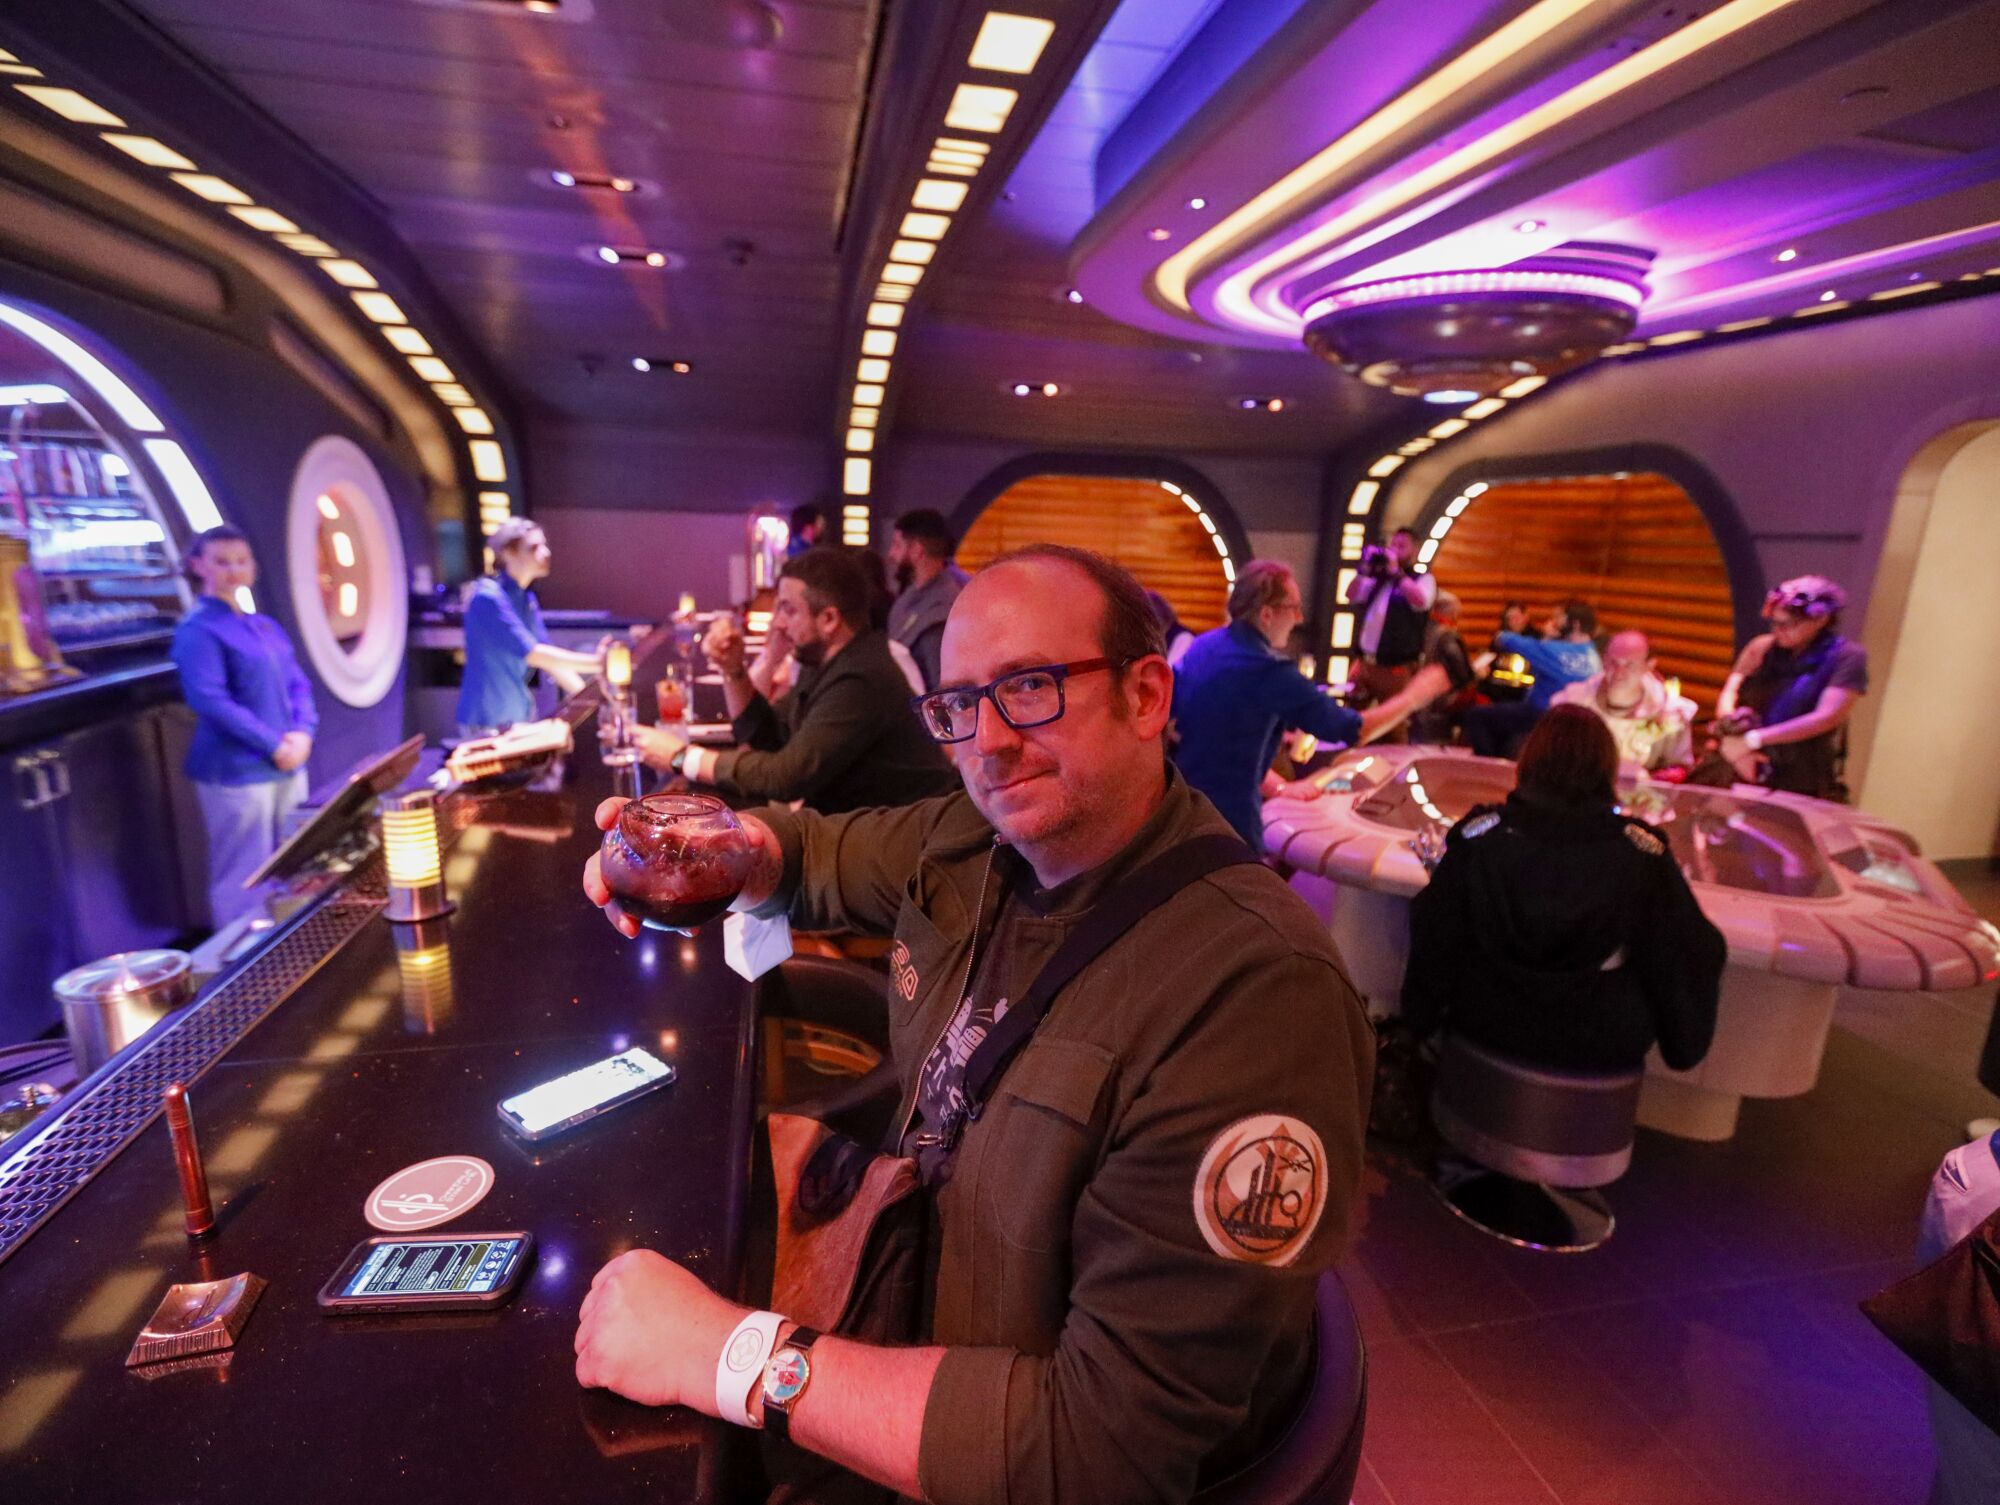 Los Angeles Times game critic Todd Martens checks out the scene in the bar aboard the Galactic Starcruiser